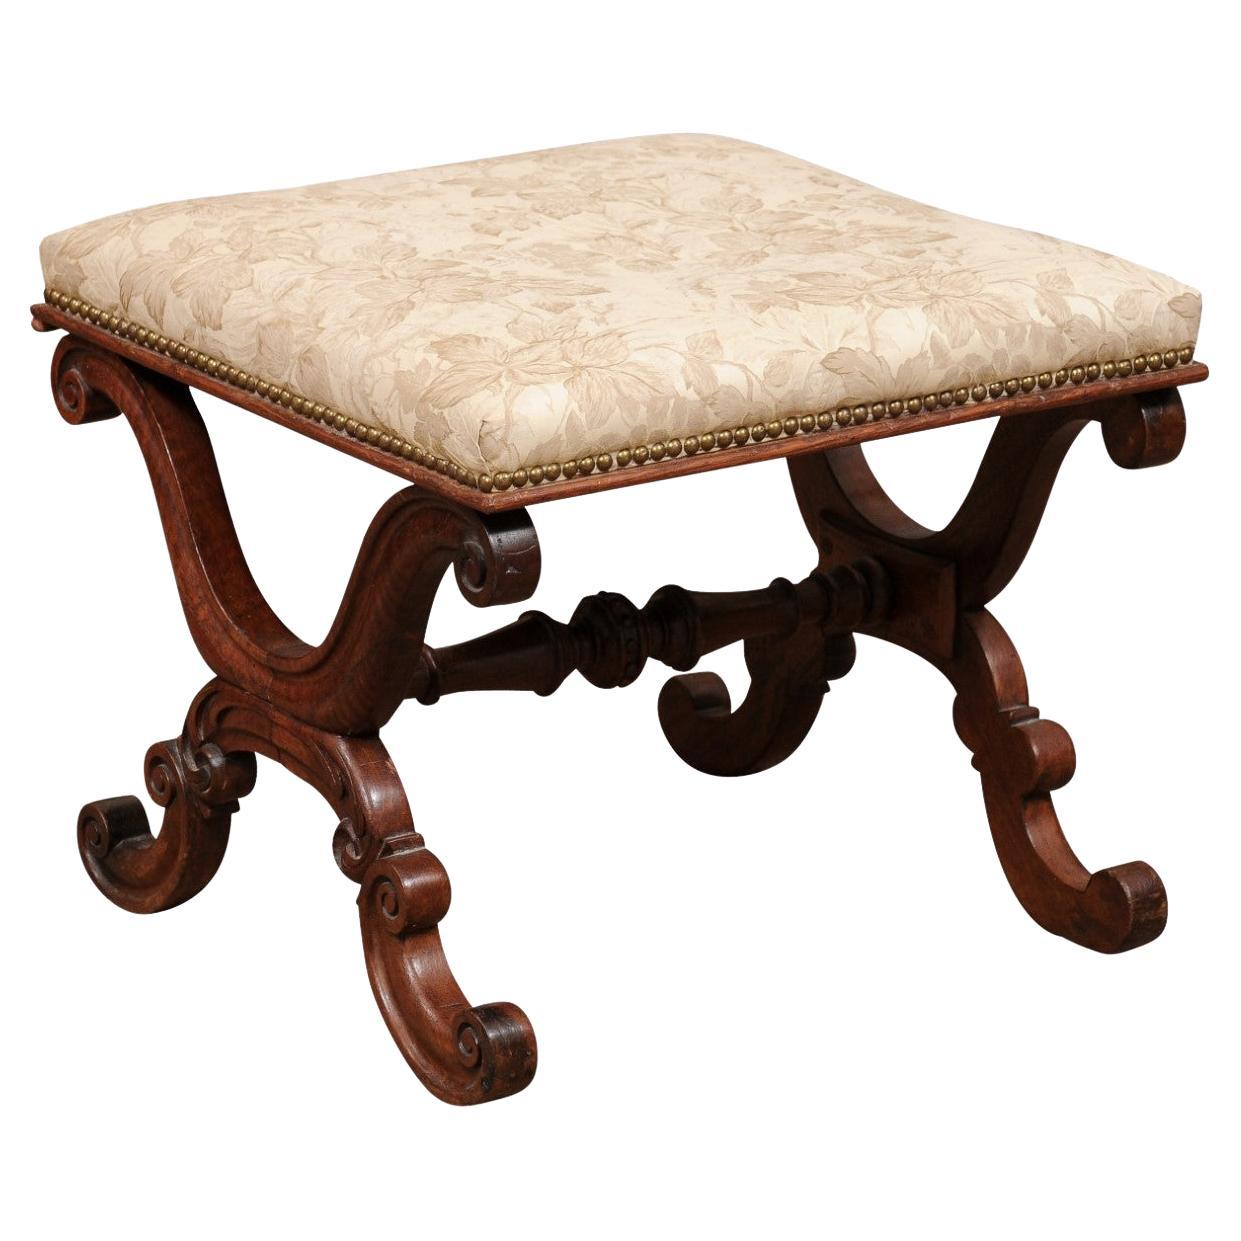 English William IV Mahogany X Form Bench with Upholstered Seat, ca. 1830 For Sale